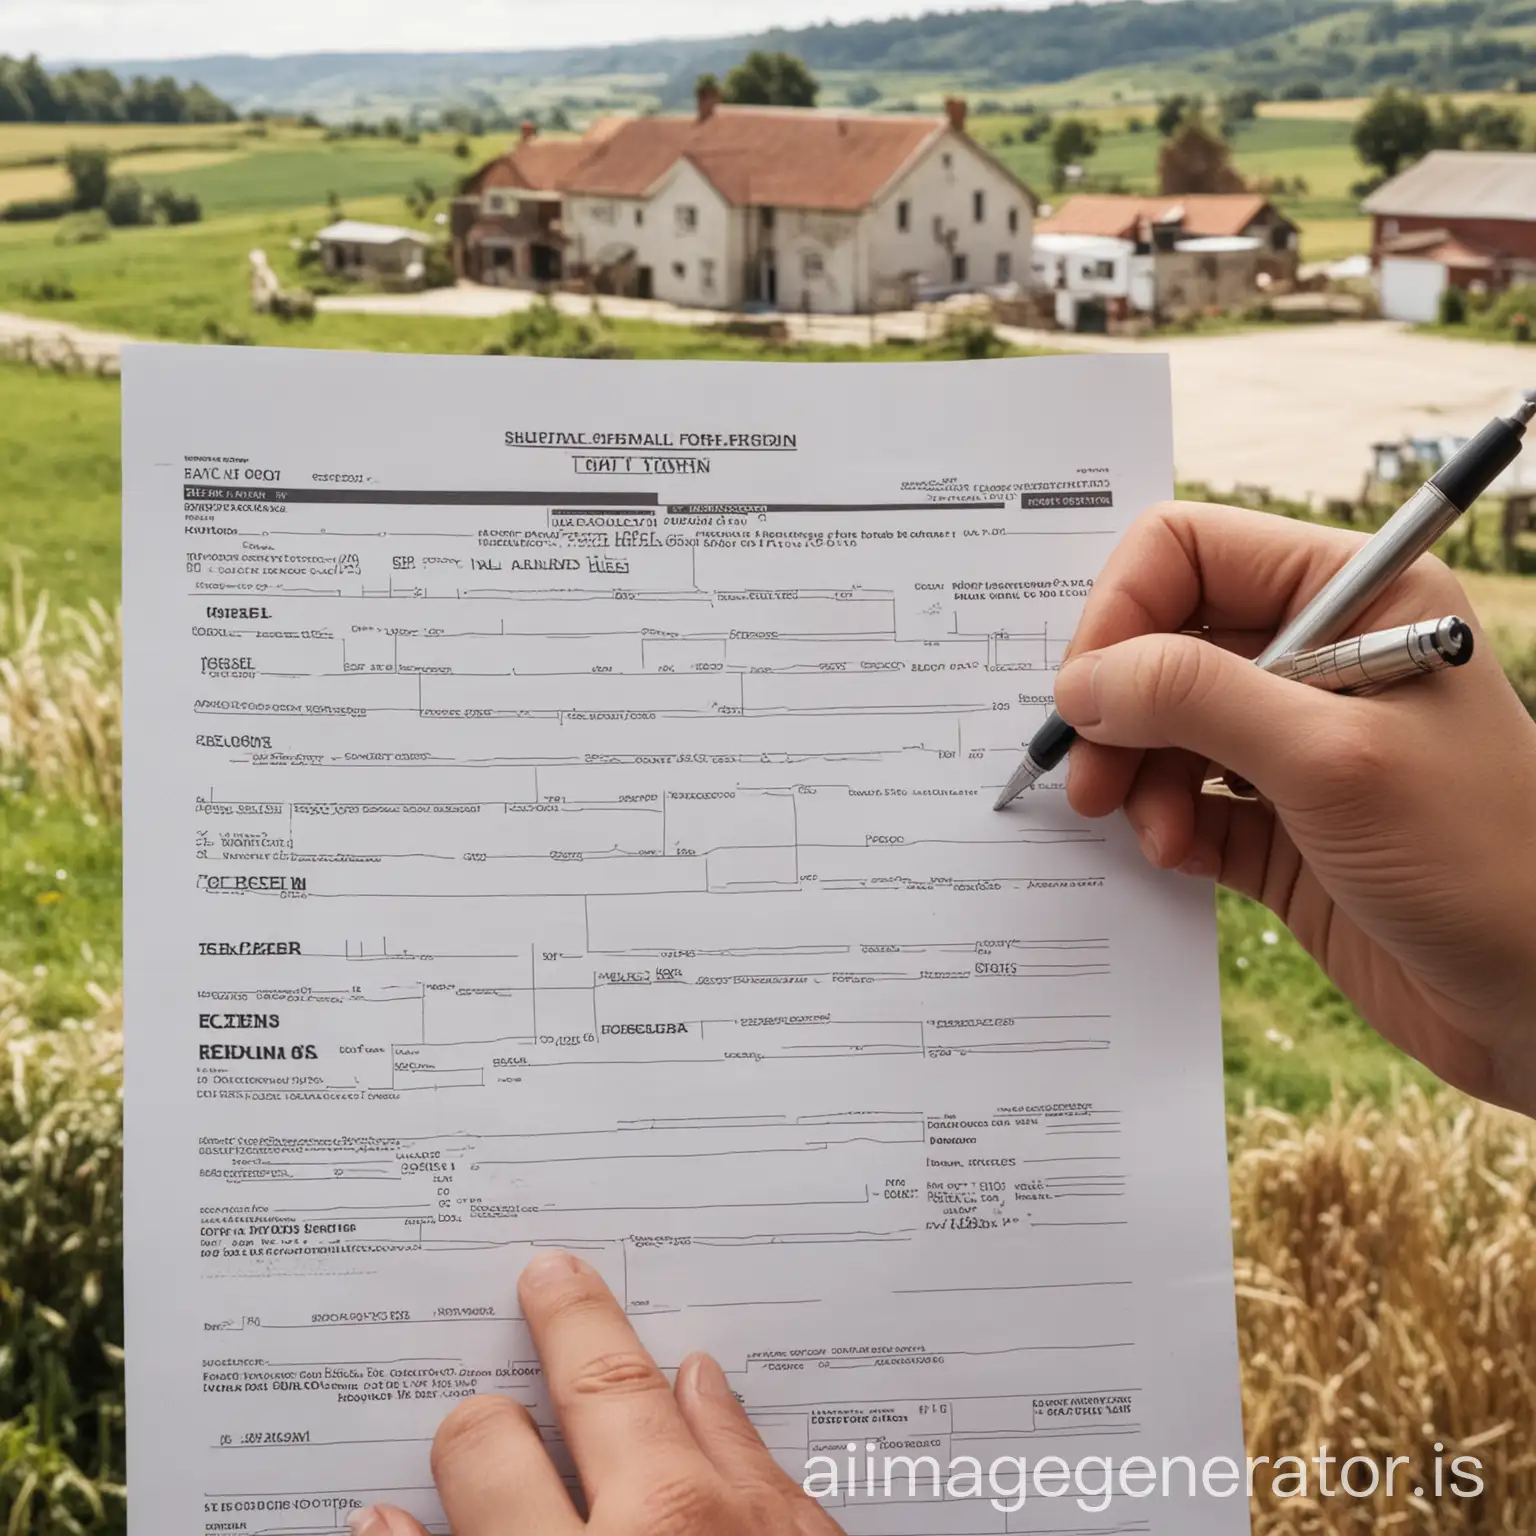 hand filling out form with image of rural property in the background